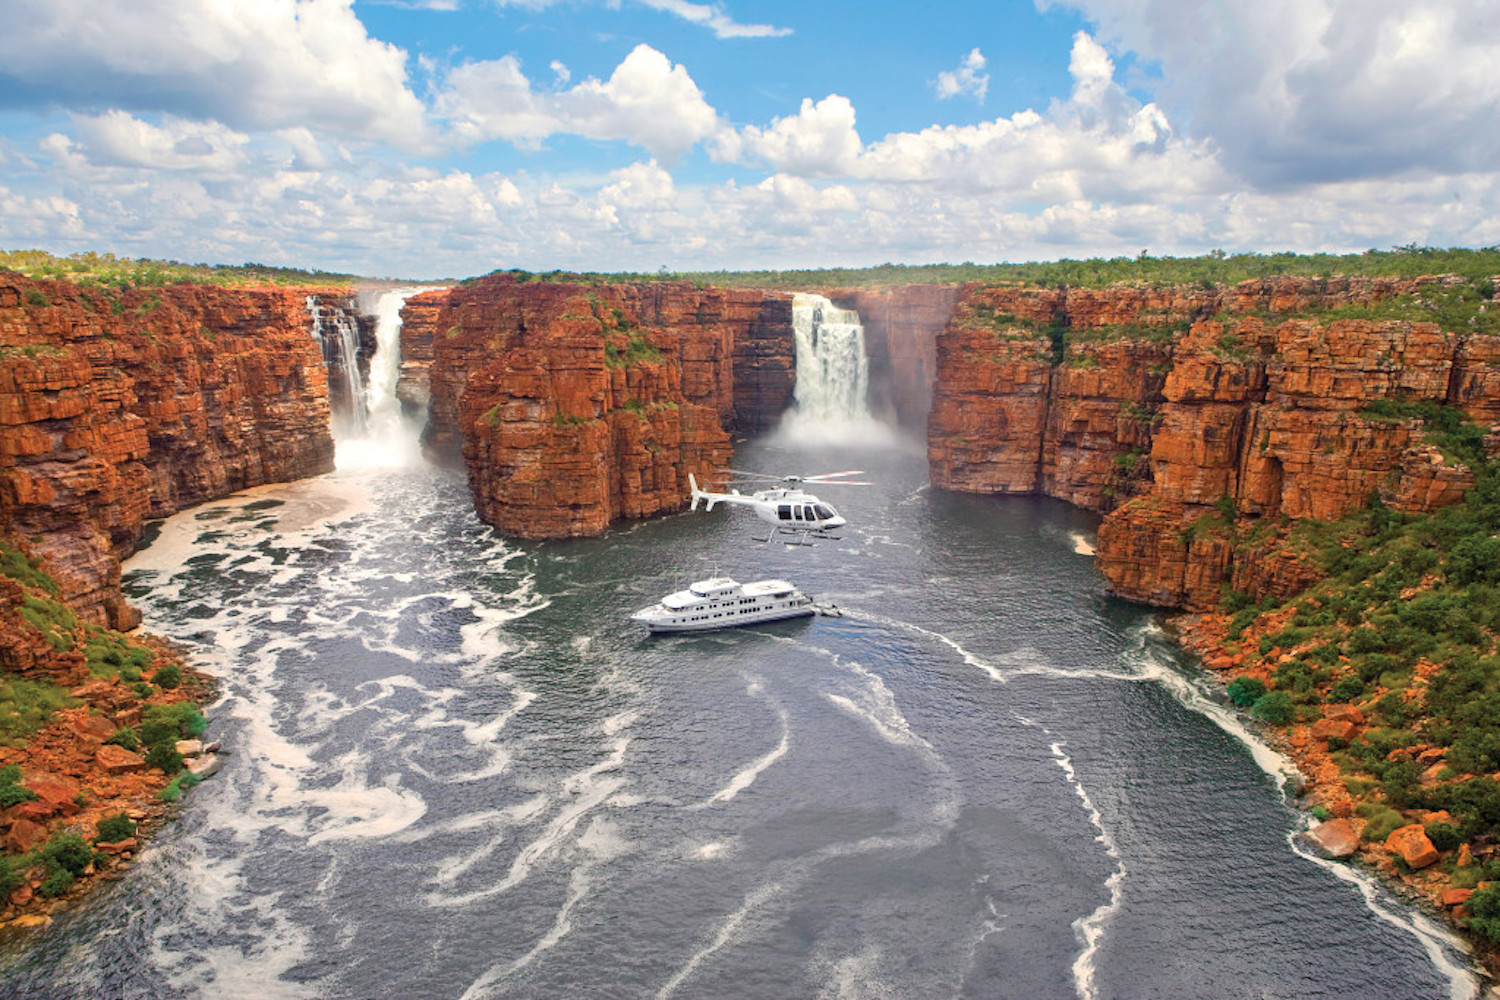 One of the unique and exclusive Australian experiences is a cruise with True North along the Kimberley Coast